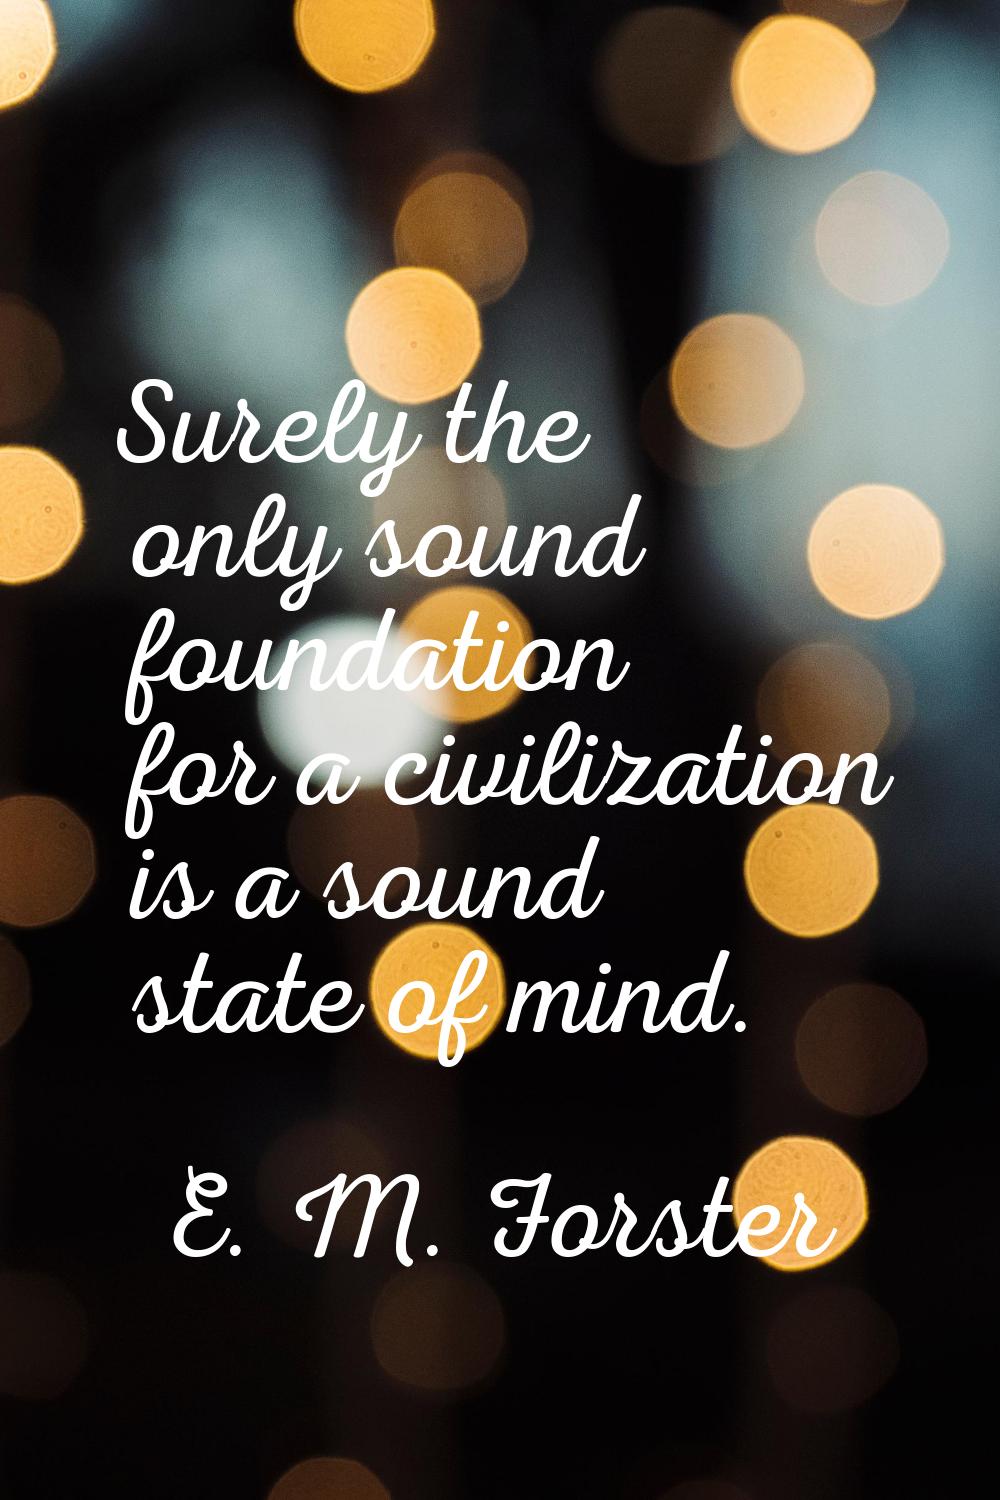 Surely the only sound foundation for a civilization is a sound state of mind.